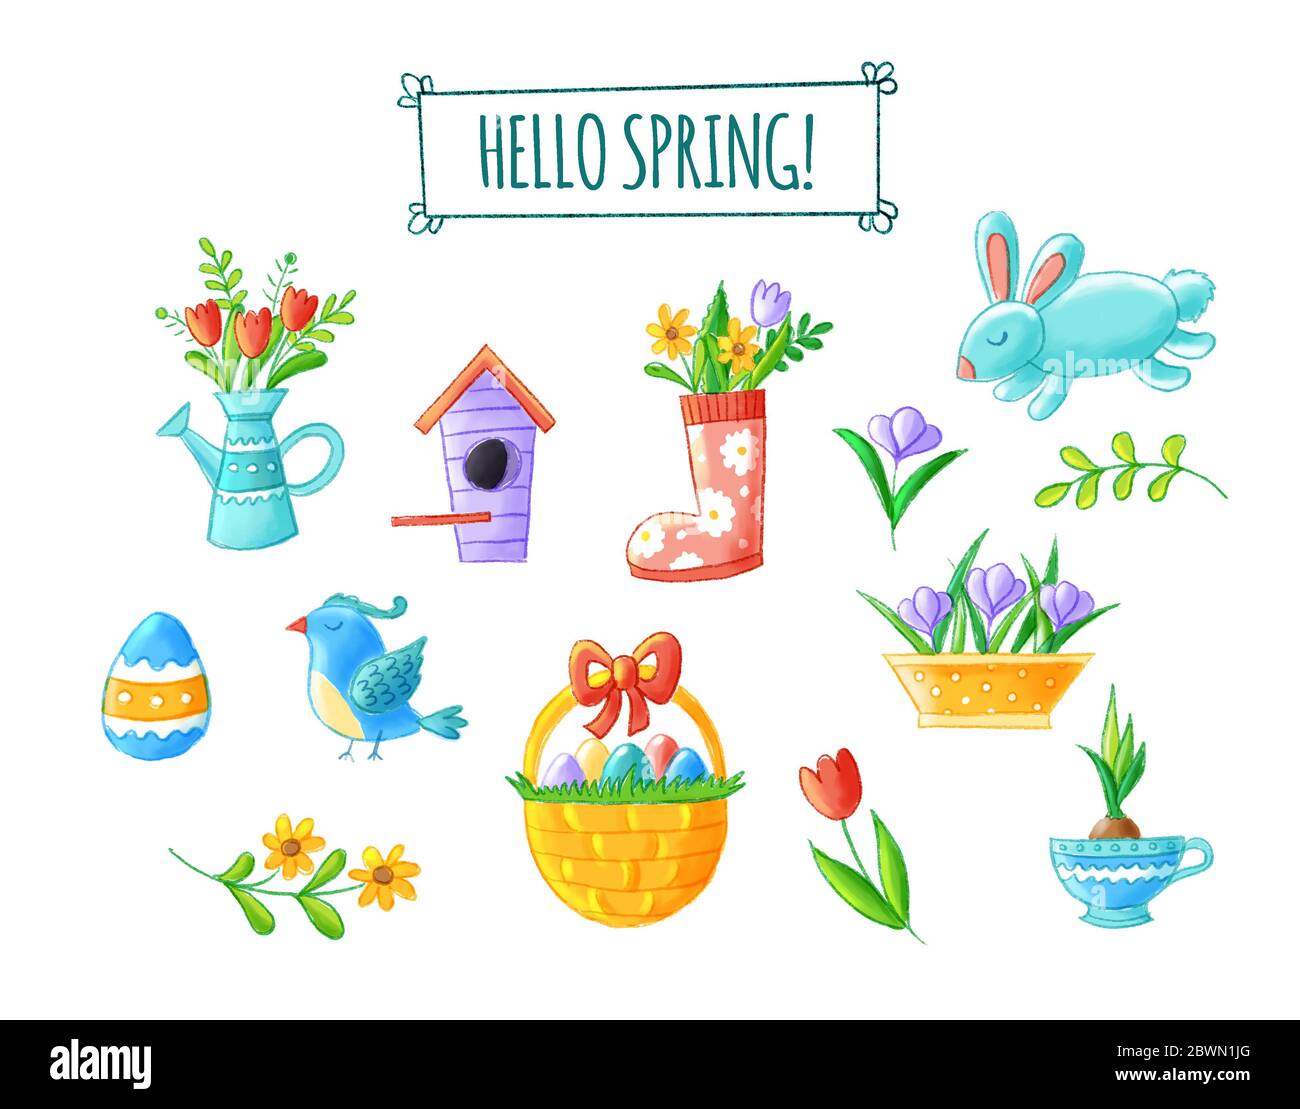 Hello spring hand drawn element collection - cute flowers, bird, bunny, easter eggs, watering can, nesting box, seasonal illustrations. Isolated on Stock Photo